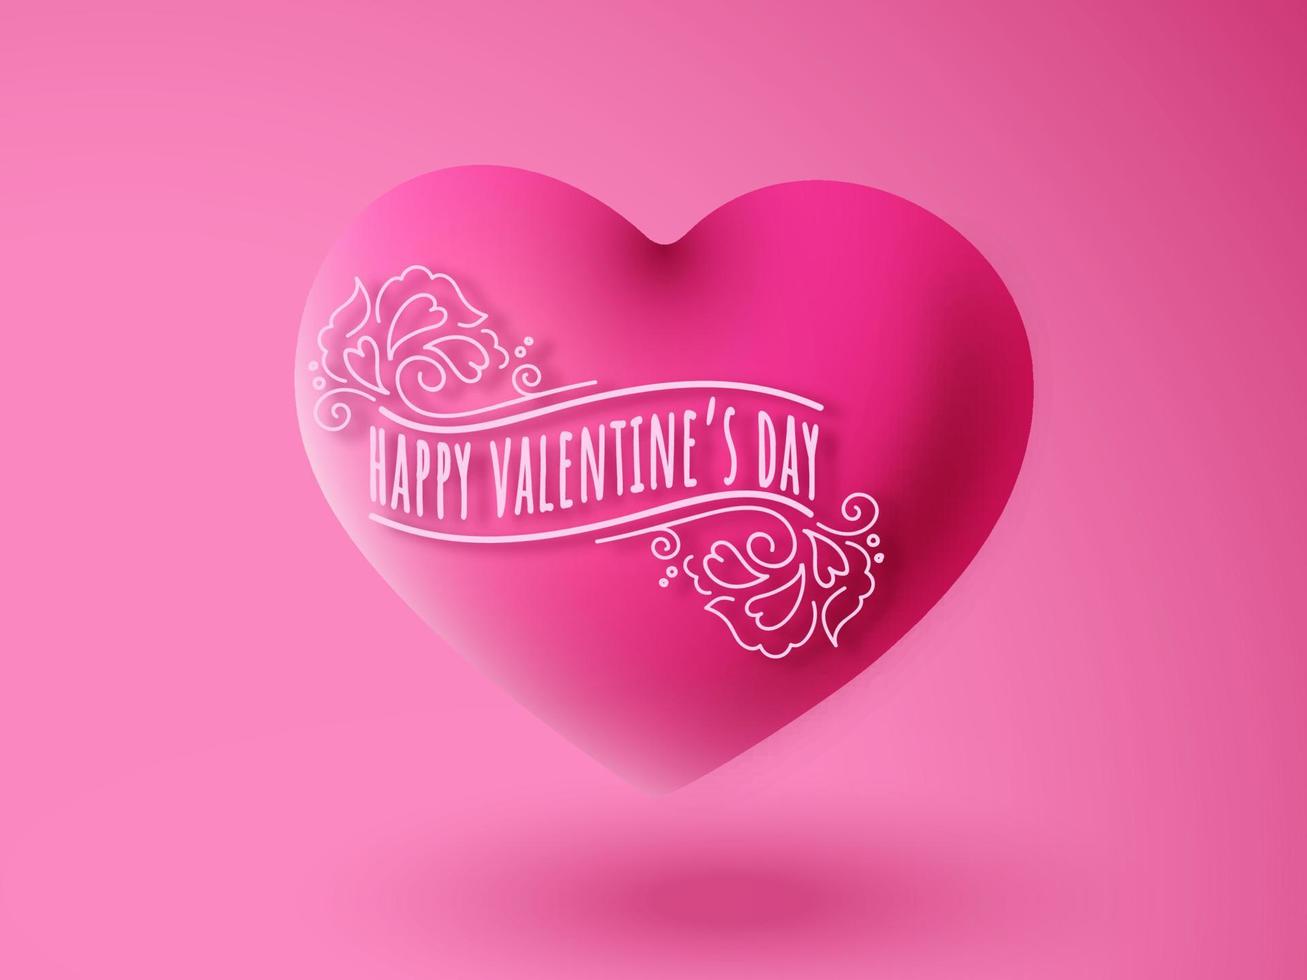 Happy Valentine's Day Text On 3D Pink Heart And Glossy Background. vector